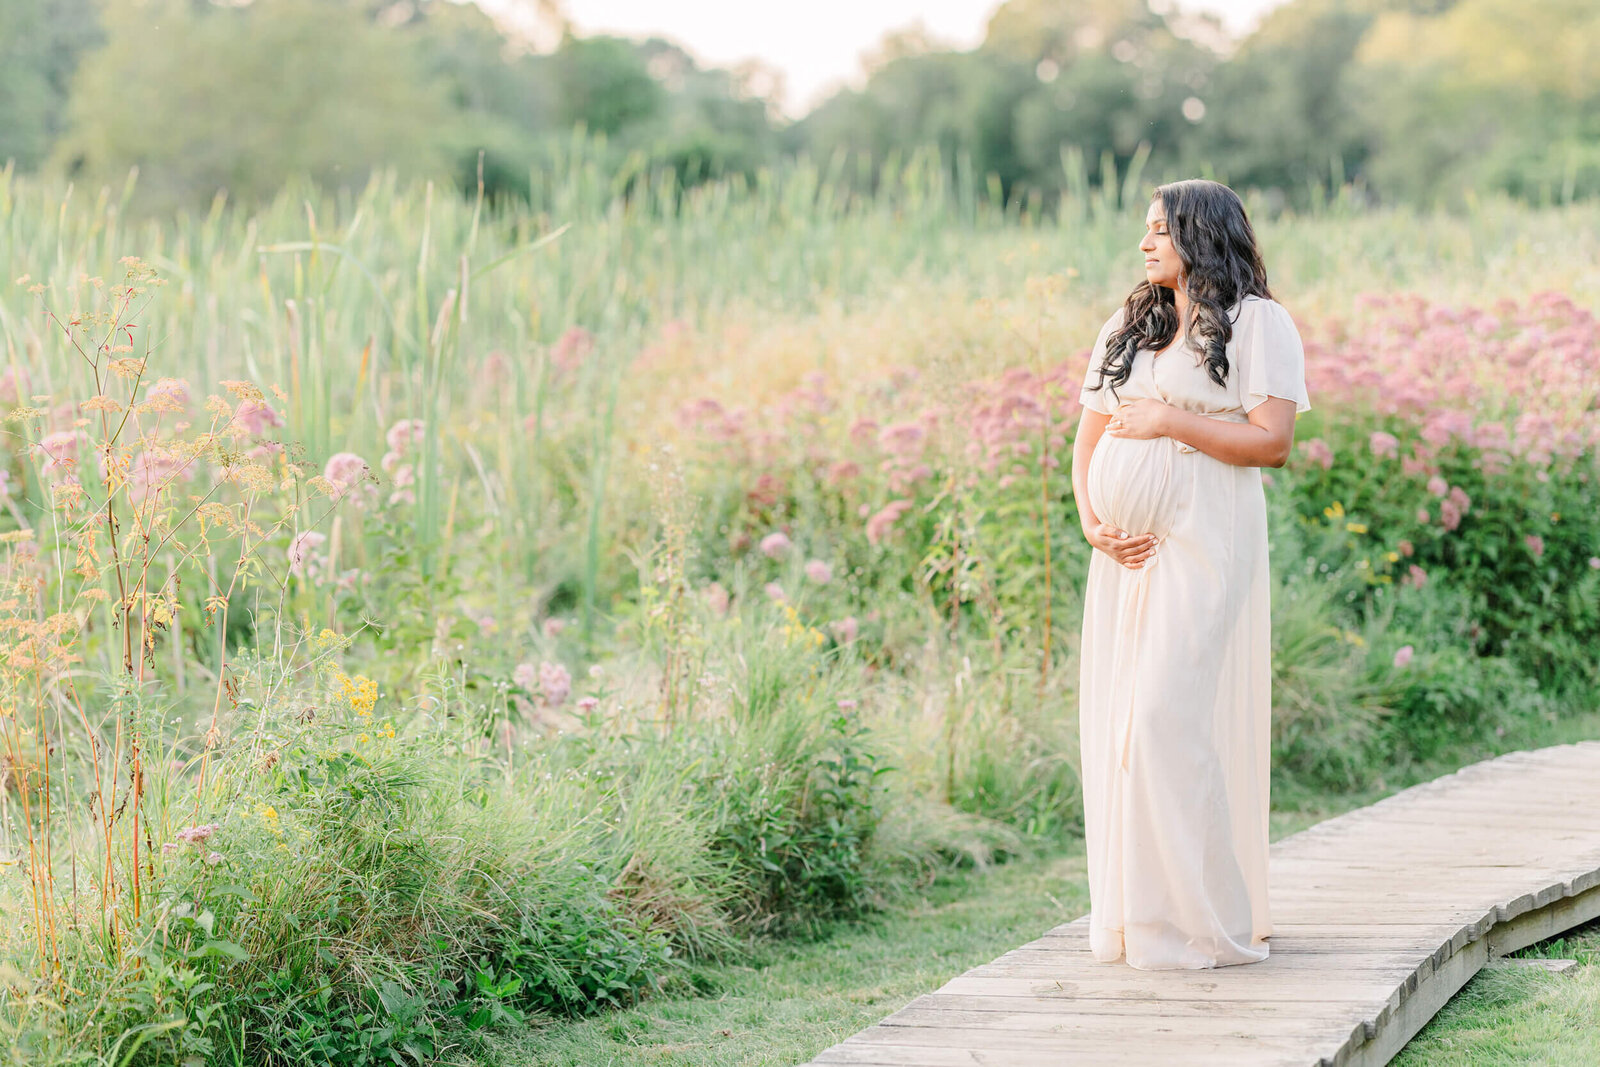 Pregnant woman cradles her baby bump in a field of wild flowers with her eyes closed